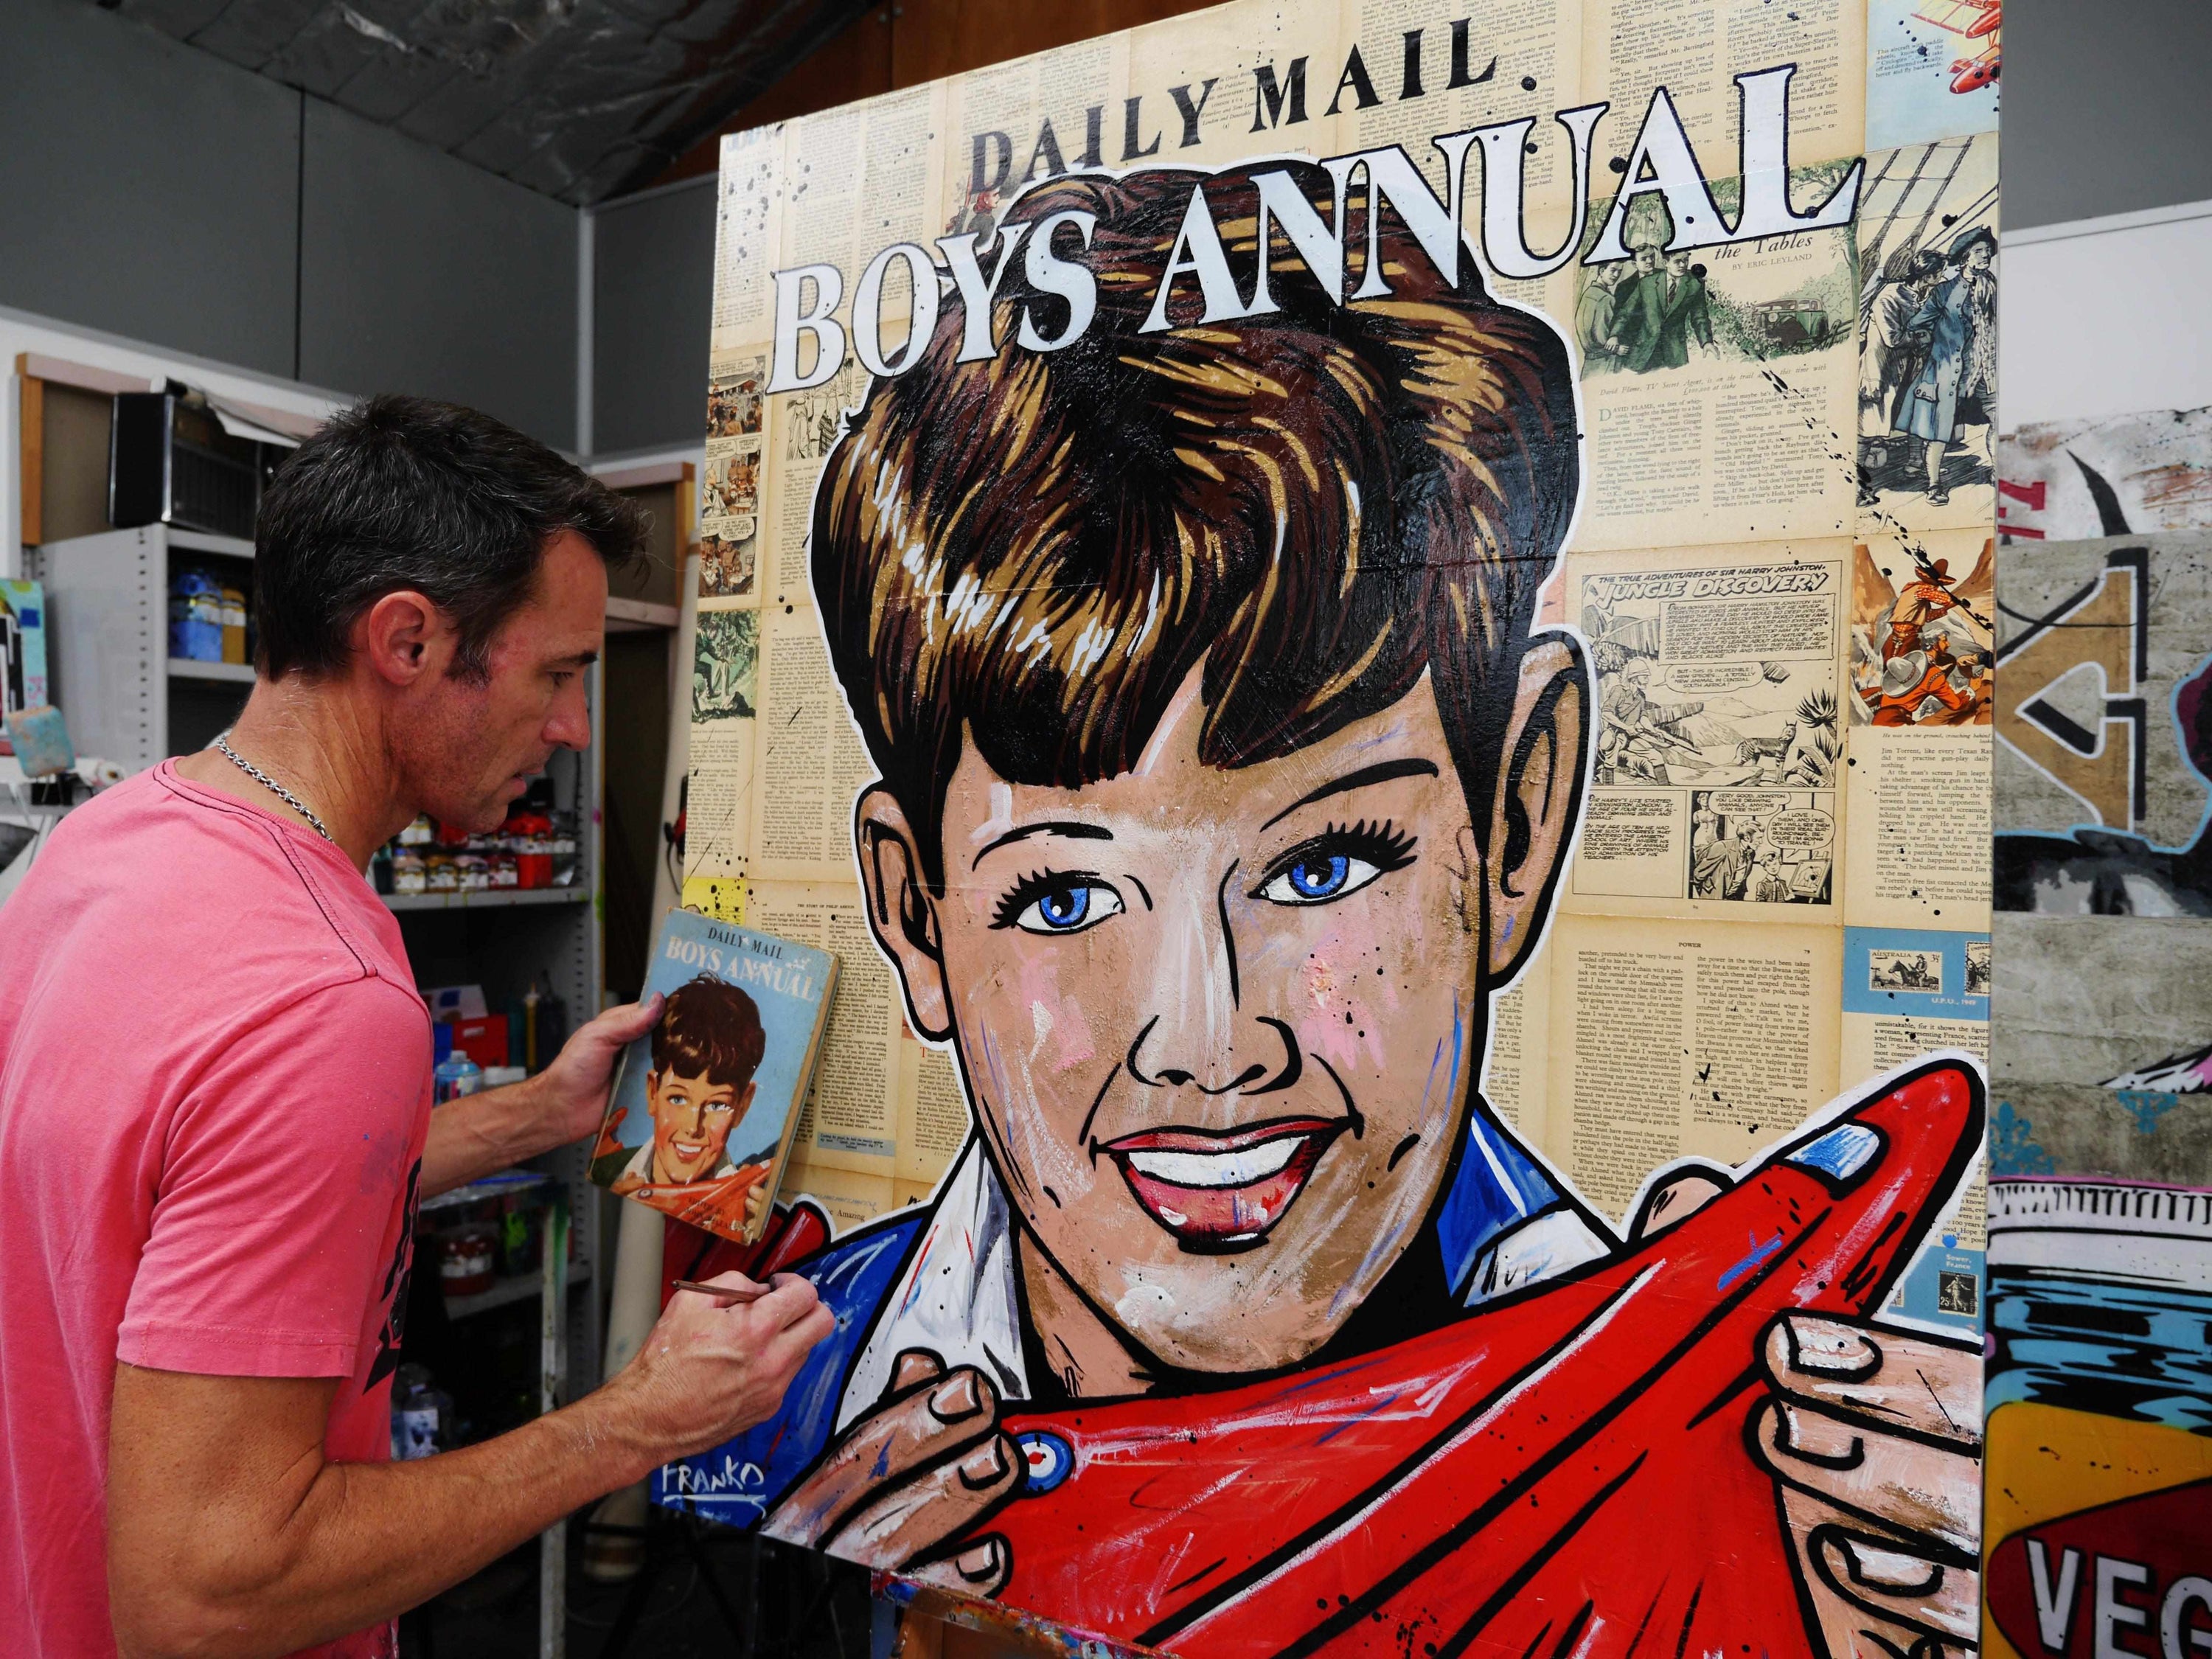 The Daily Mail 120cm x 100cm The Daily Mail Boys Annual Vintage Book Pop art Painting